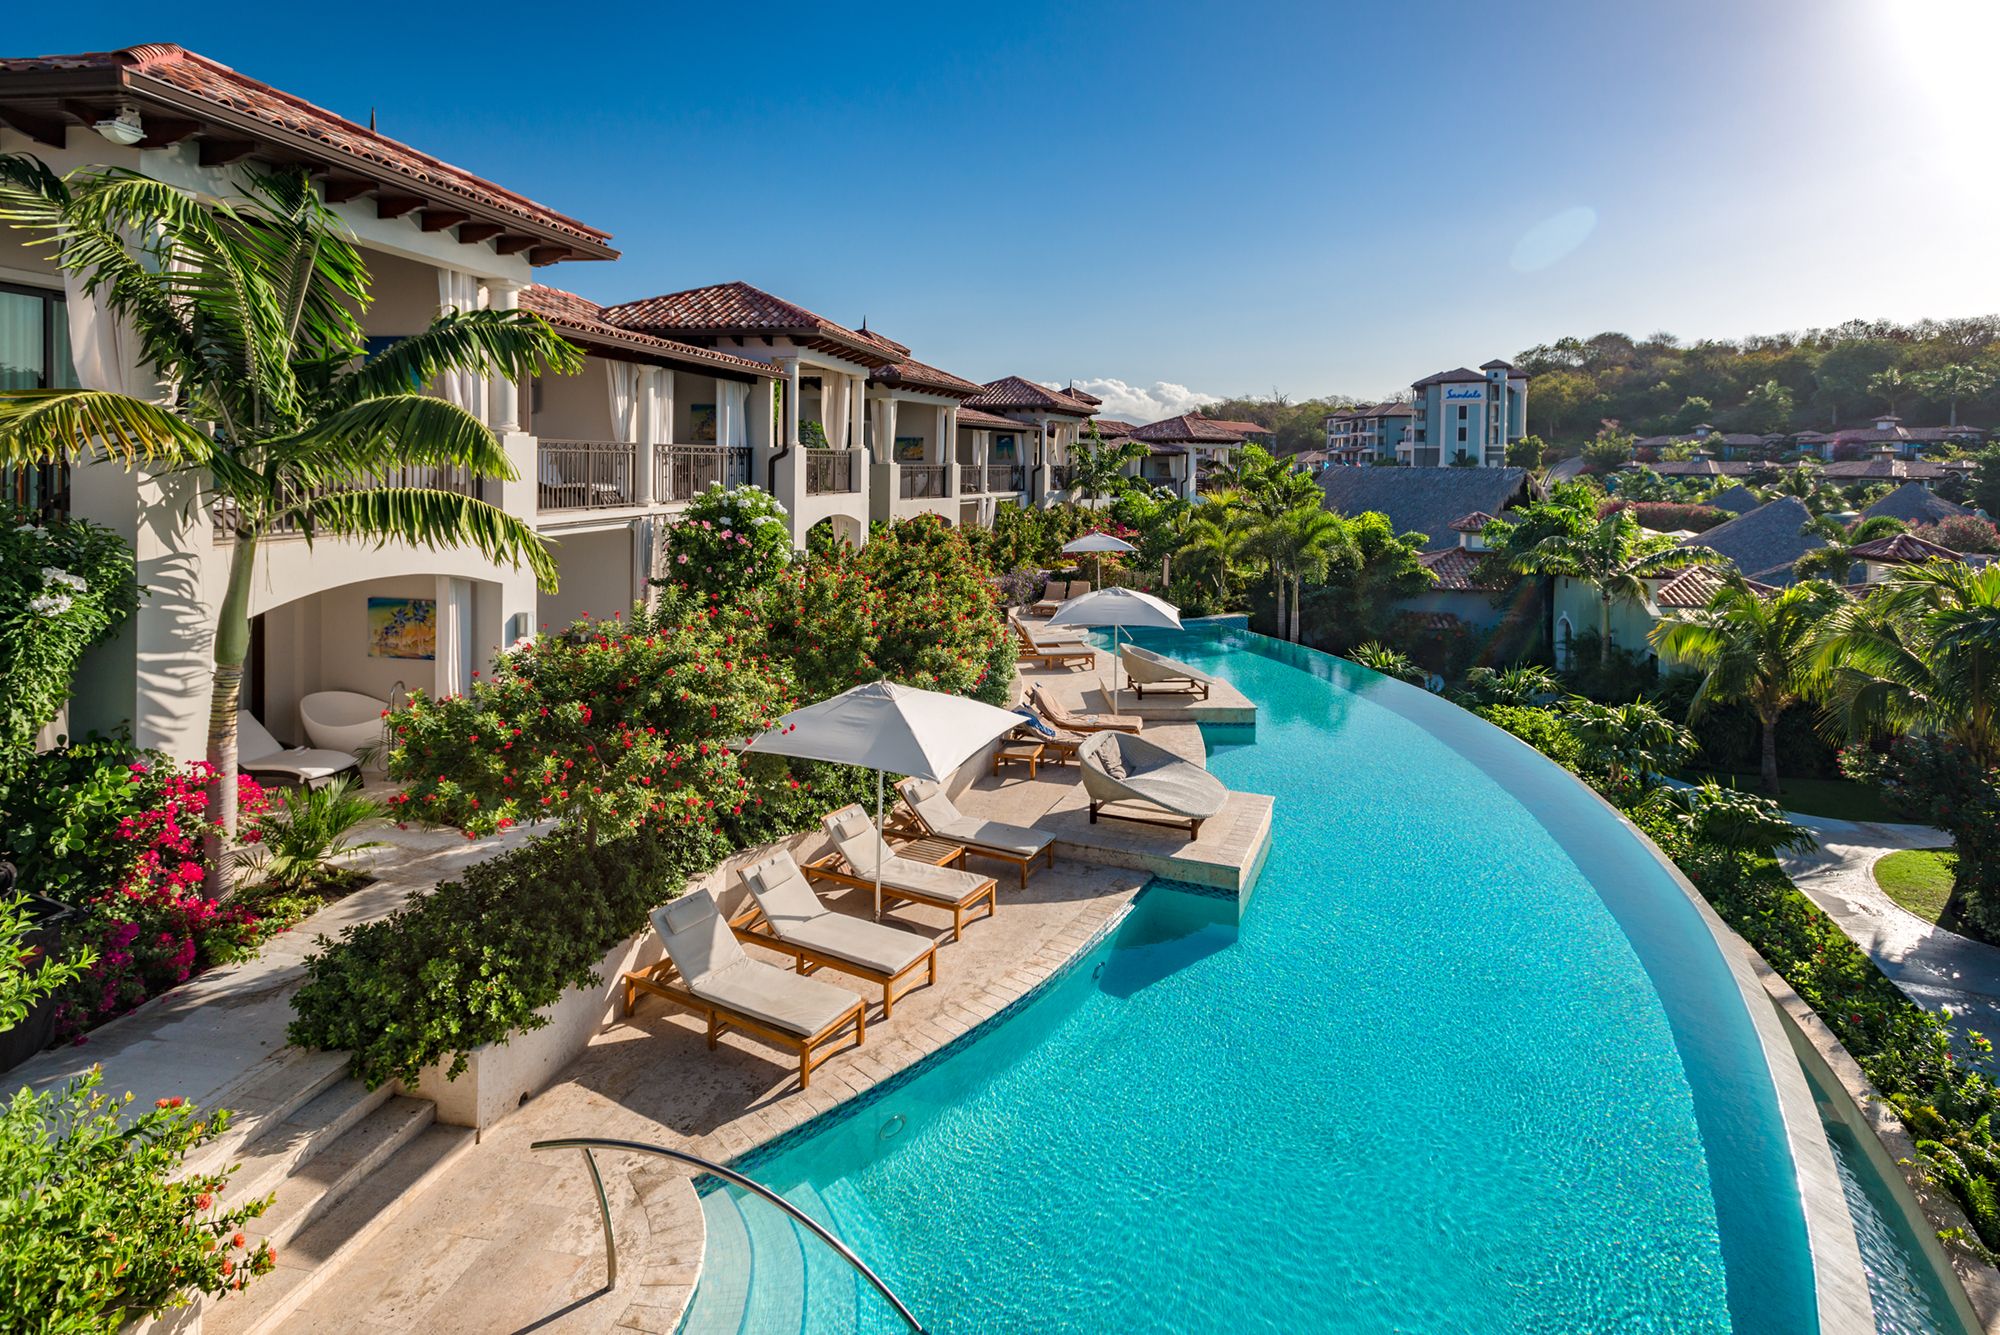 Sandals and Beaches Resorts Receive 9 Diving Awards